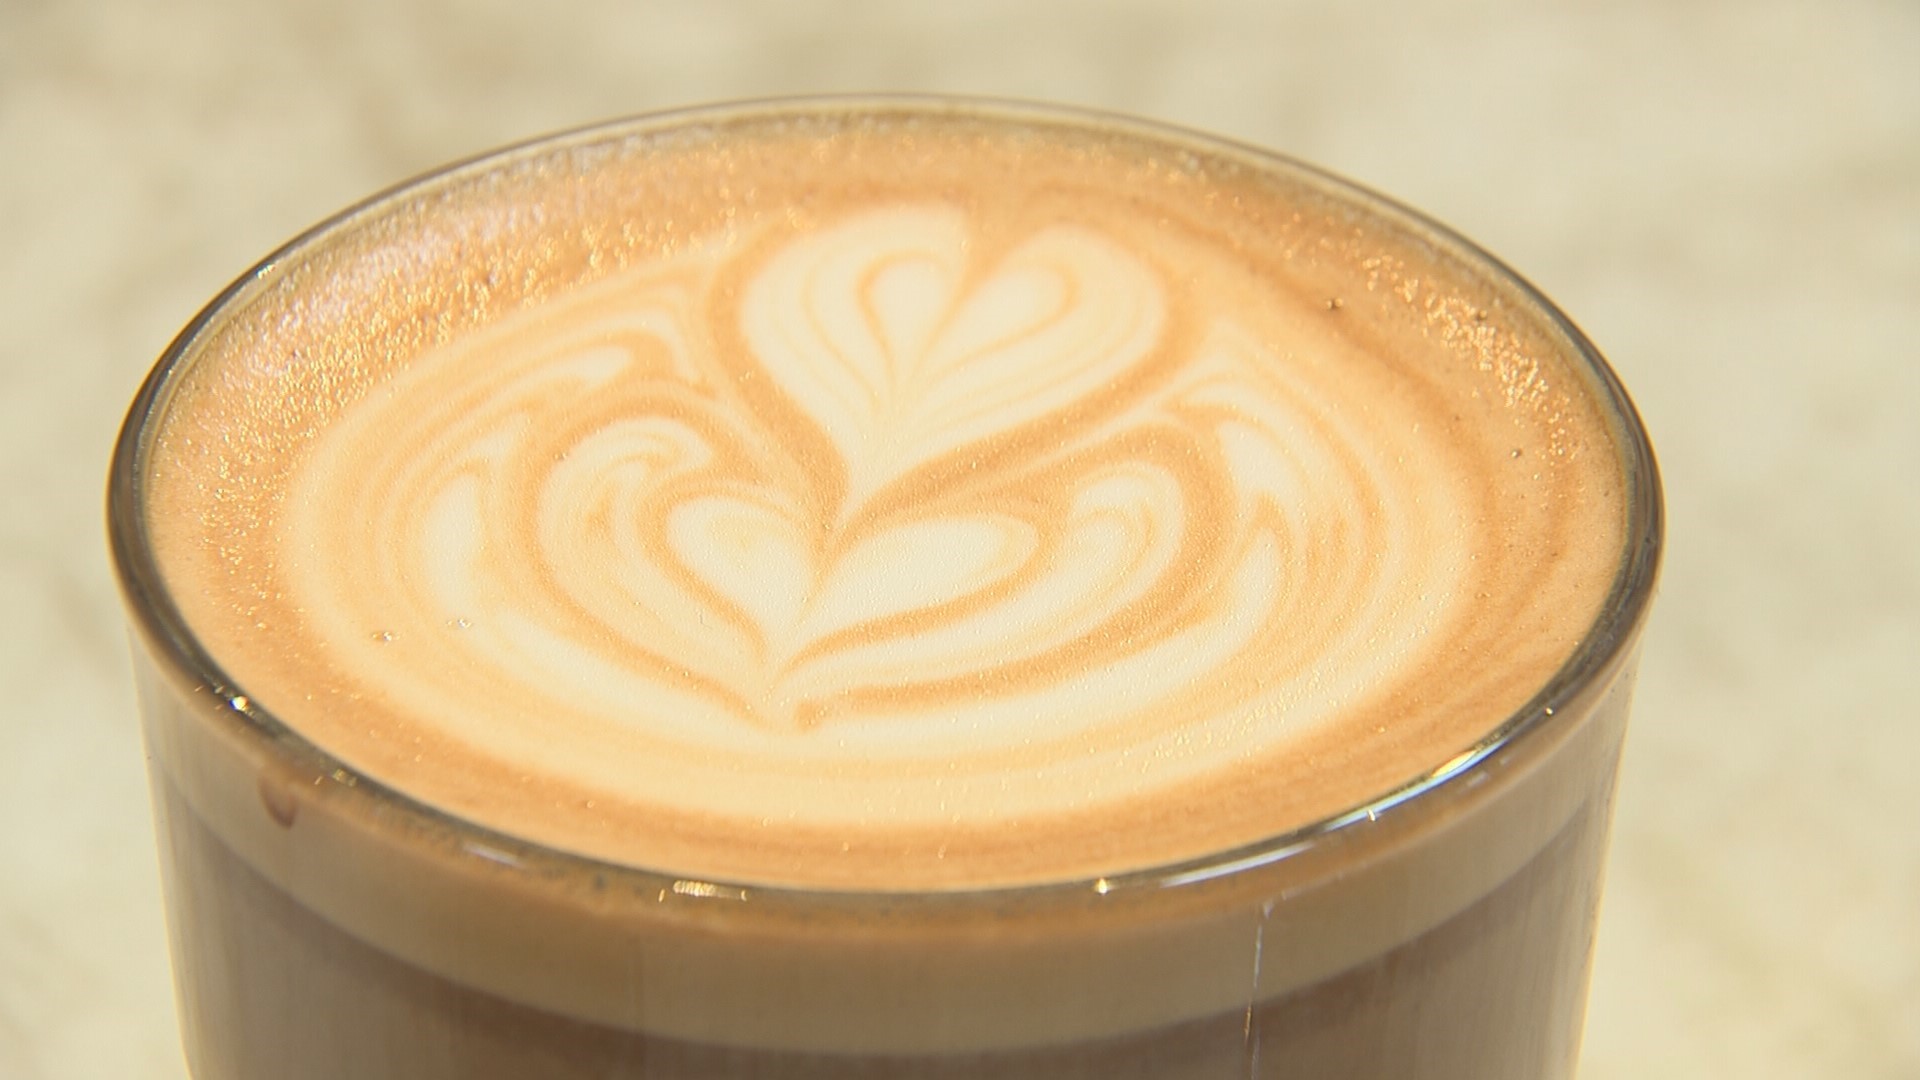 It's hip, hot and happenin'. And not just the coffee! They serve up coffee and more at Everett's Narrative Coffee Co.